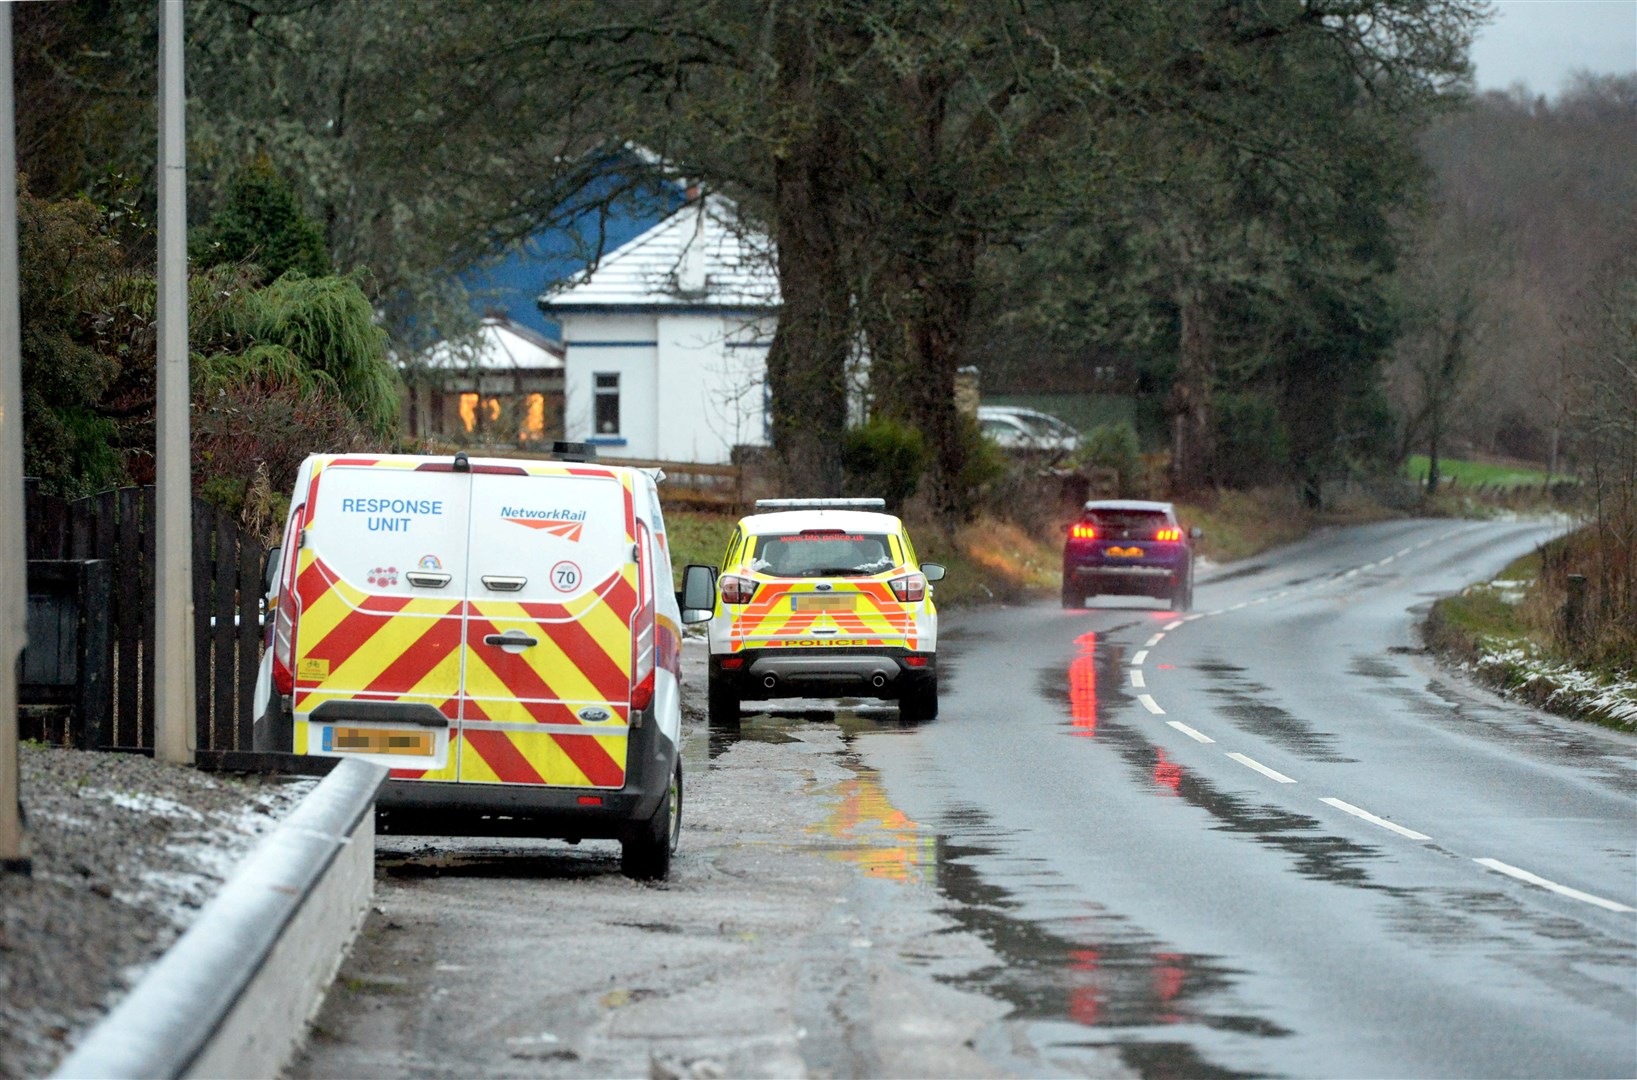 Emergency services were called to the scene near Clachnaharry.